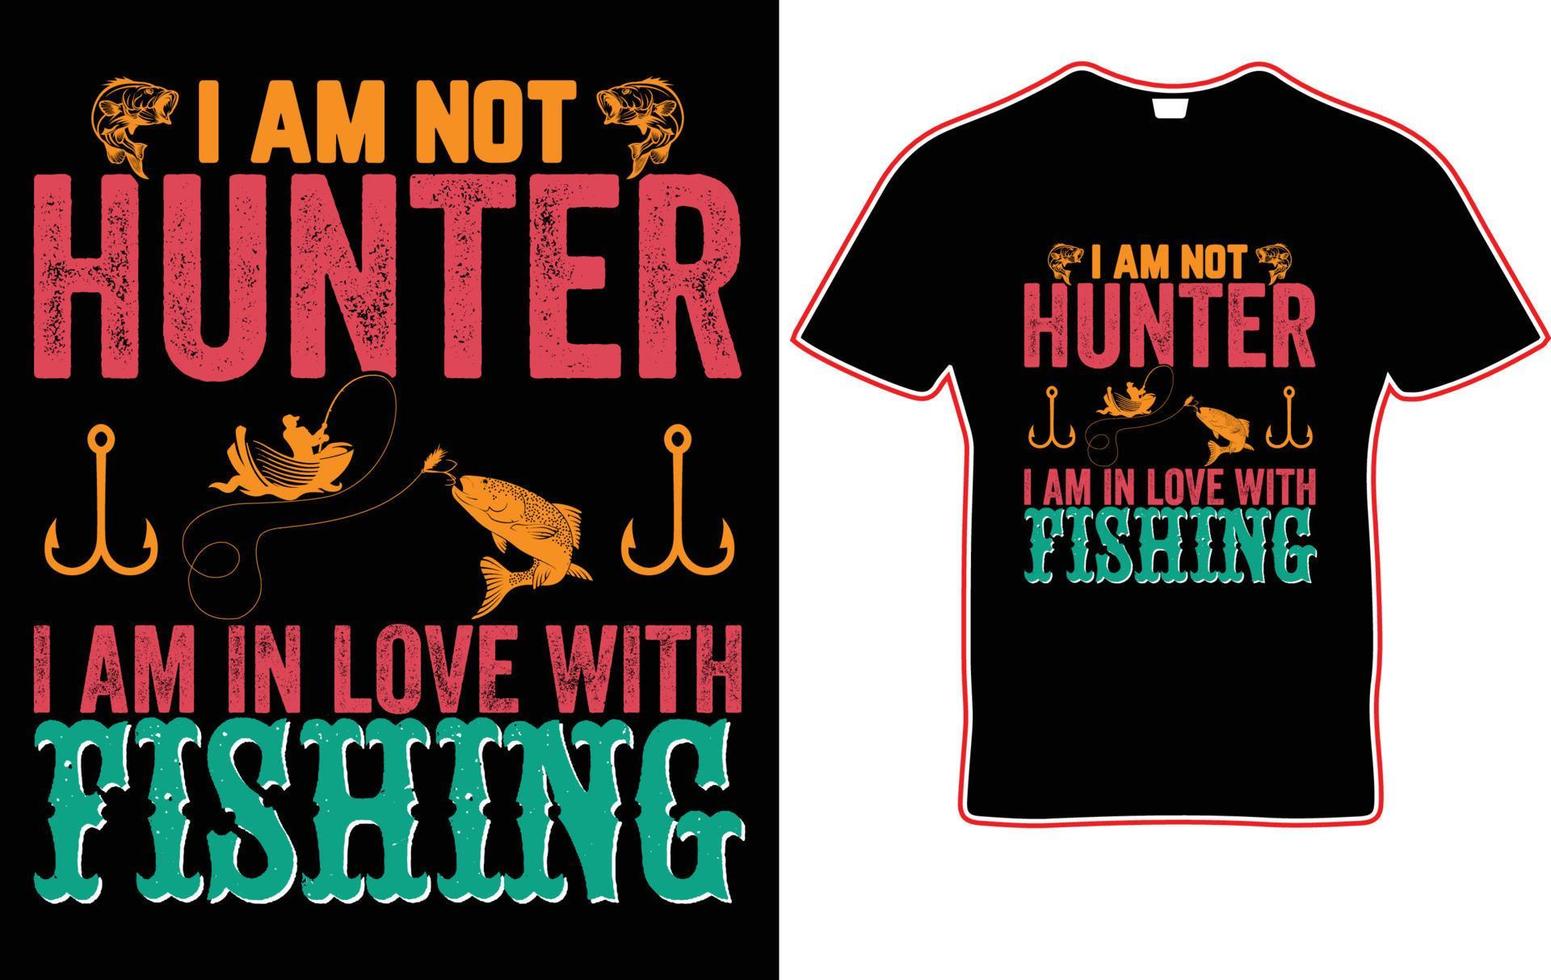 I am not hunter I am in love with fishing t shirt design. fishing